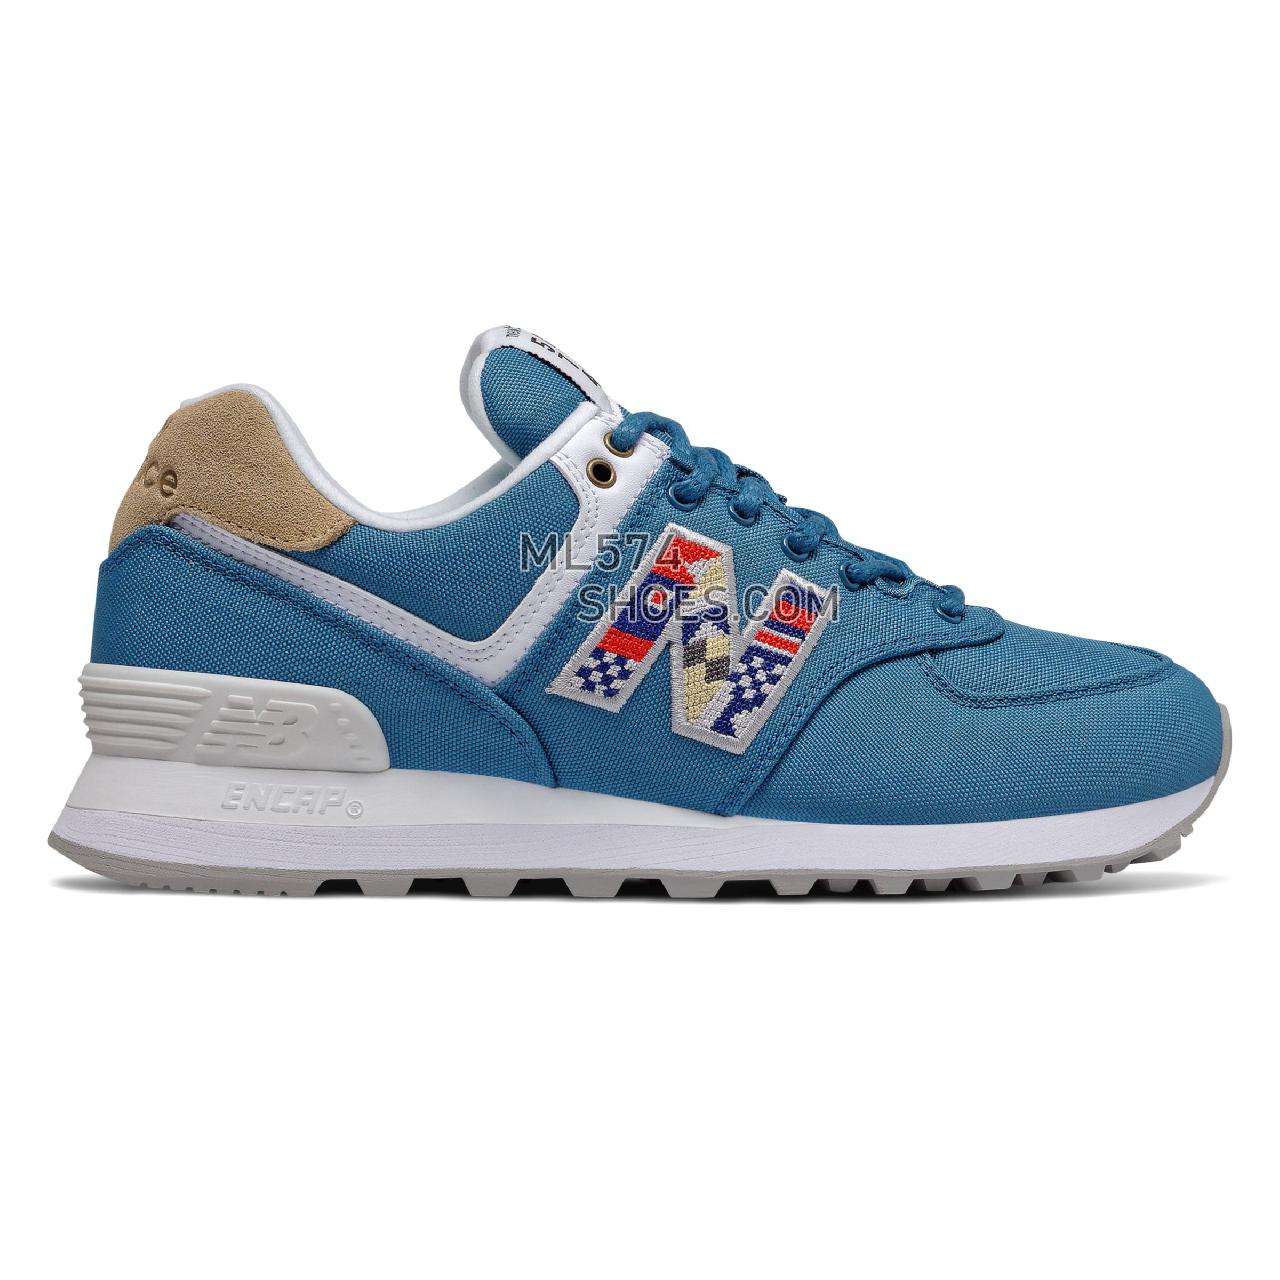 New Balance 574 - Women's Classic Sneakers - Mako Blue with Incense - WL574SOG